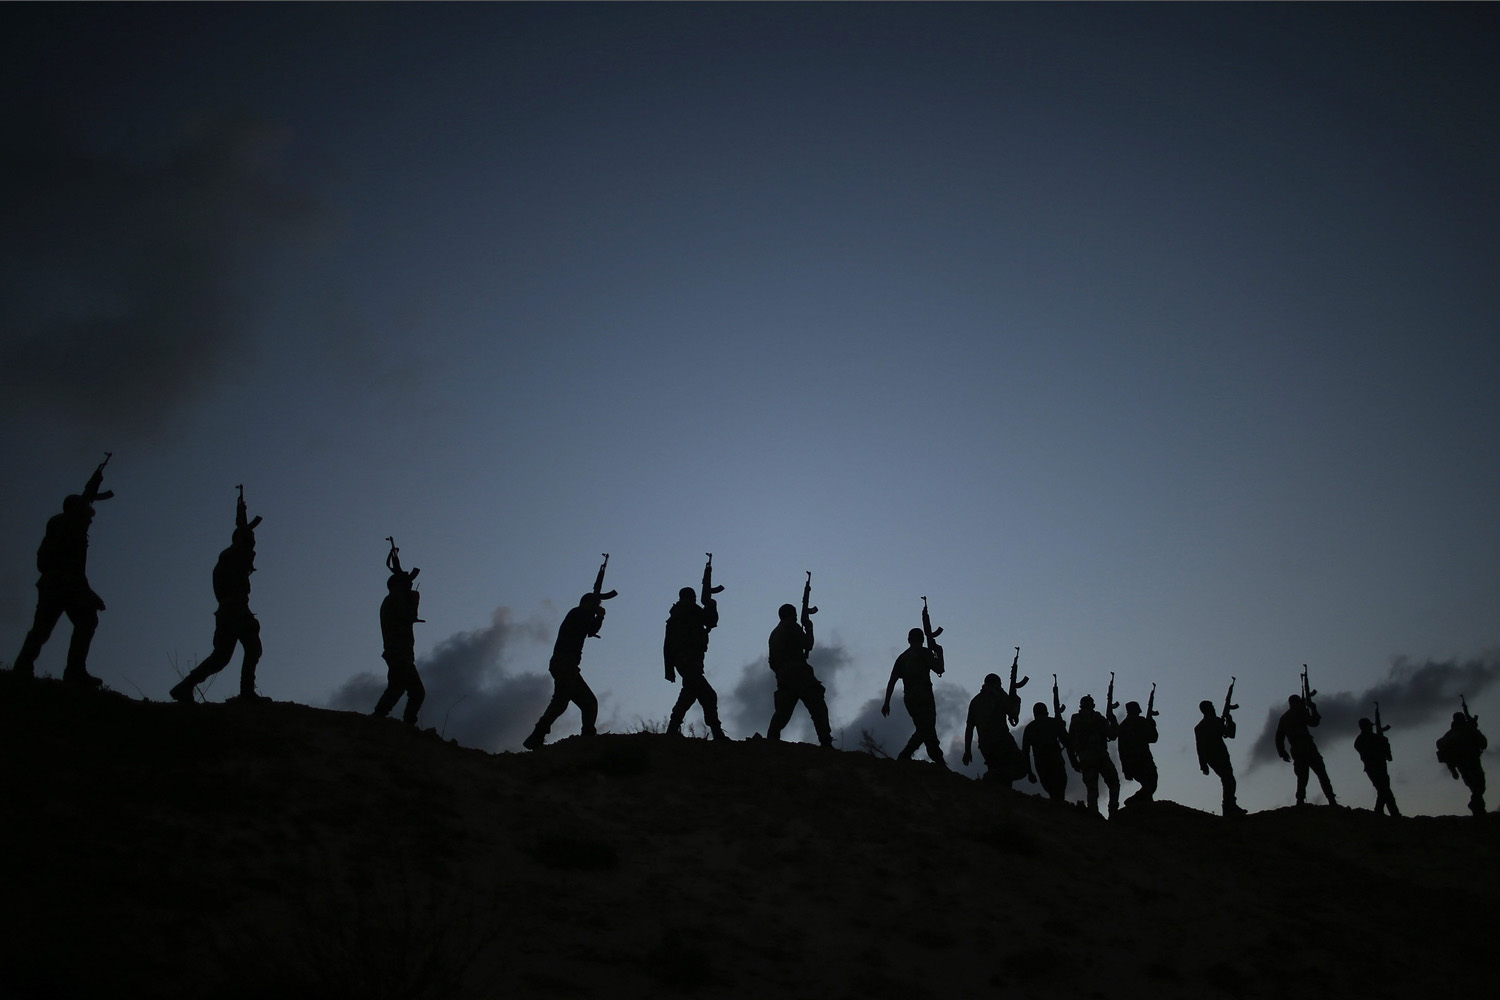 Palestinian Hamas militants march during a training exercise in Gaza